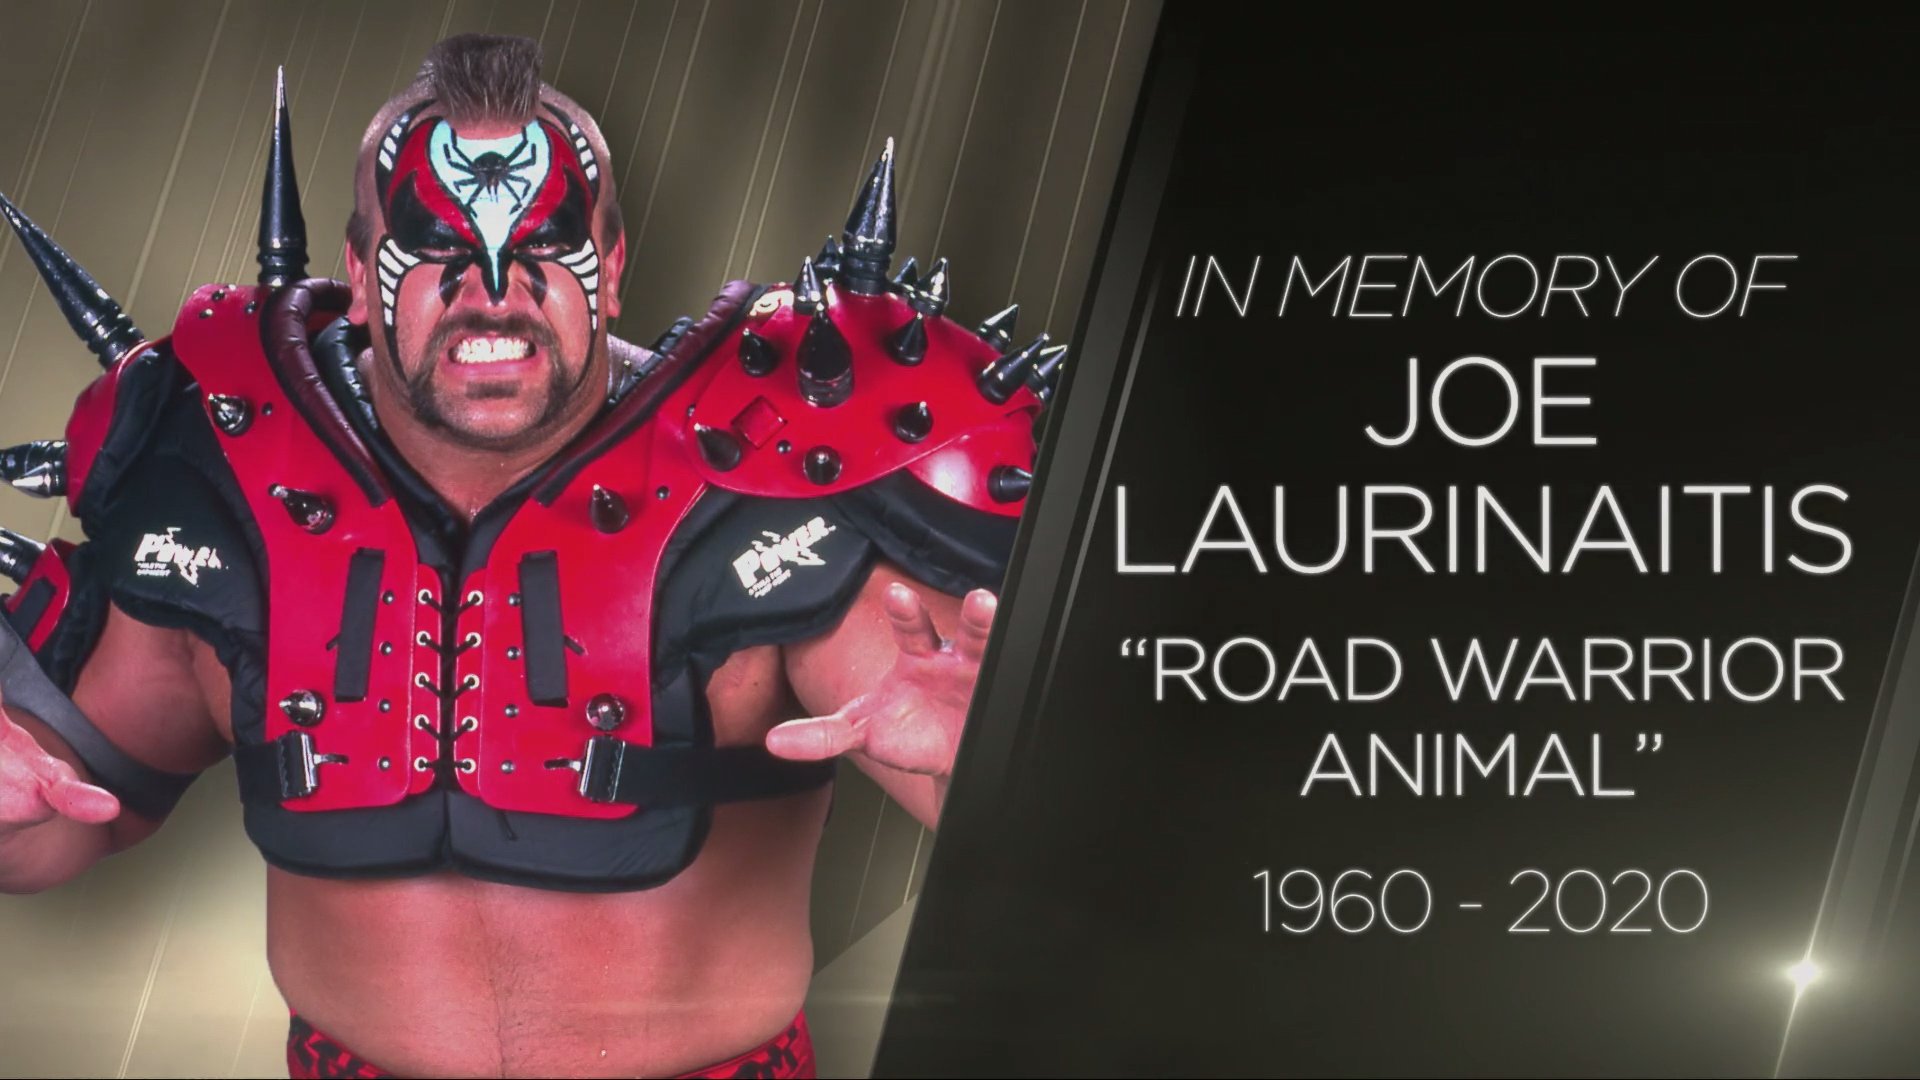 New Road Warrior Animal Shirt to Benefit Family, LeBron James and Others  Remember Animal, Animal Tributes on AEW Dynamite